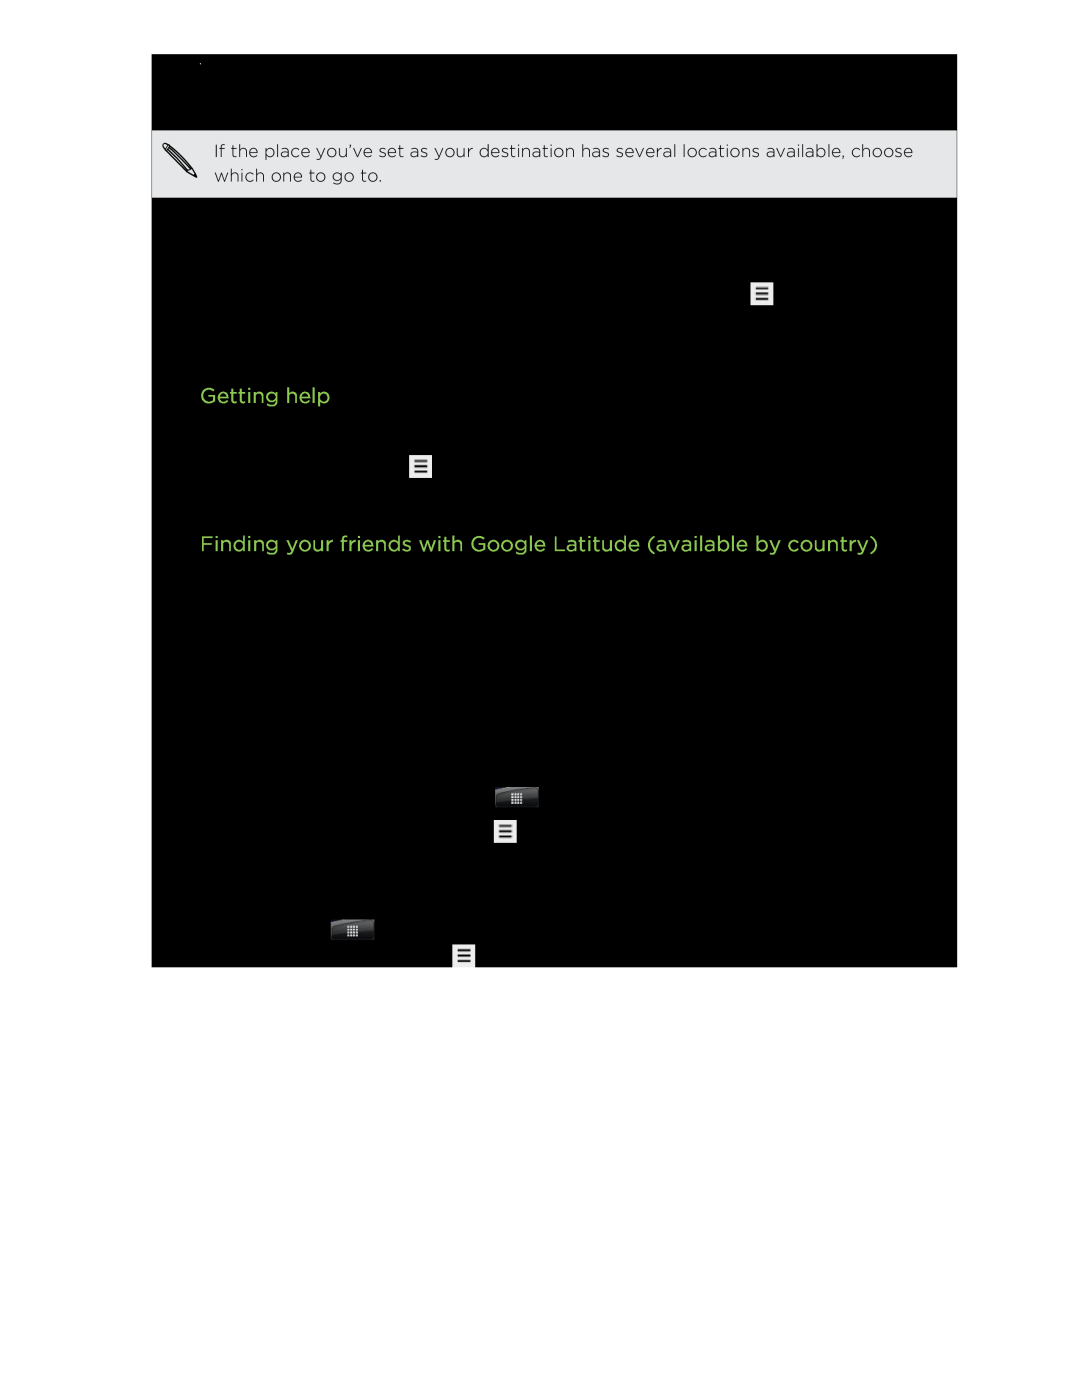 HTC S manual Finding your friends with Google Latitude available by country, Getting help 